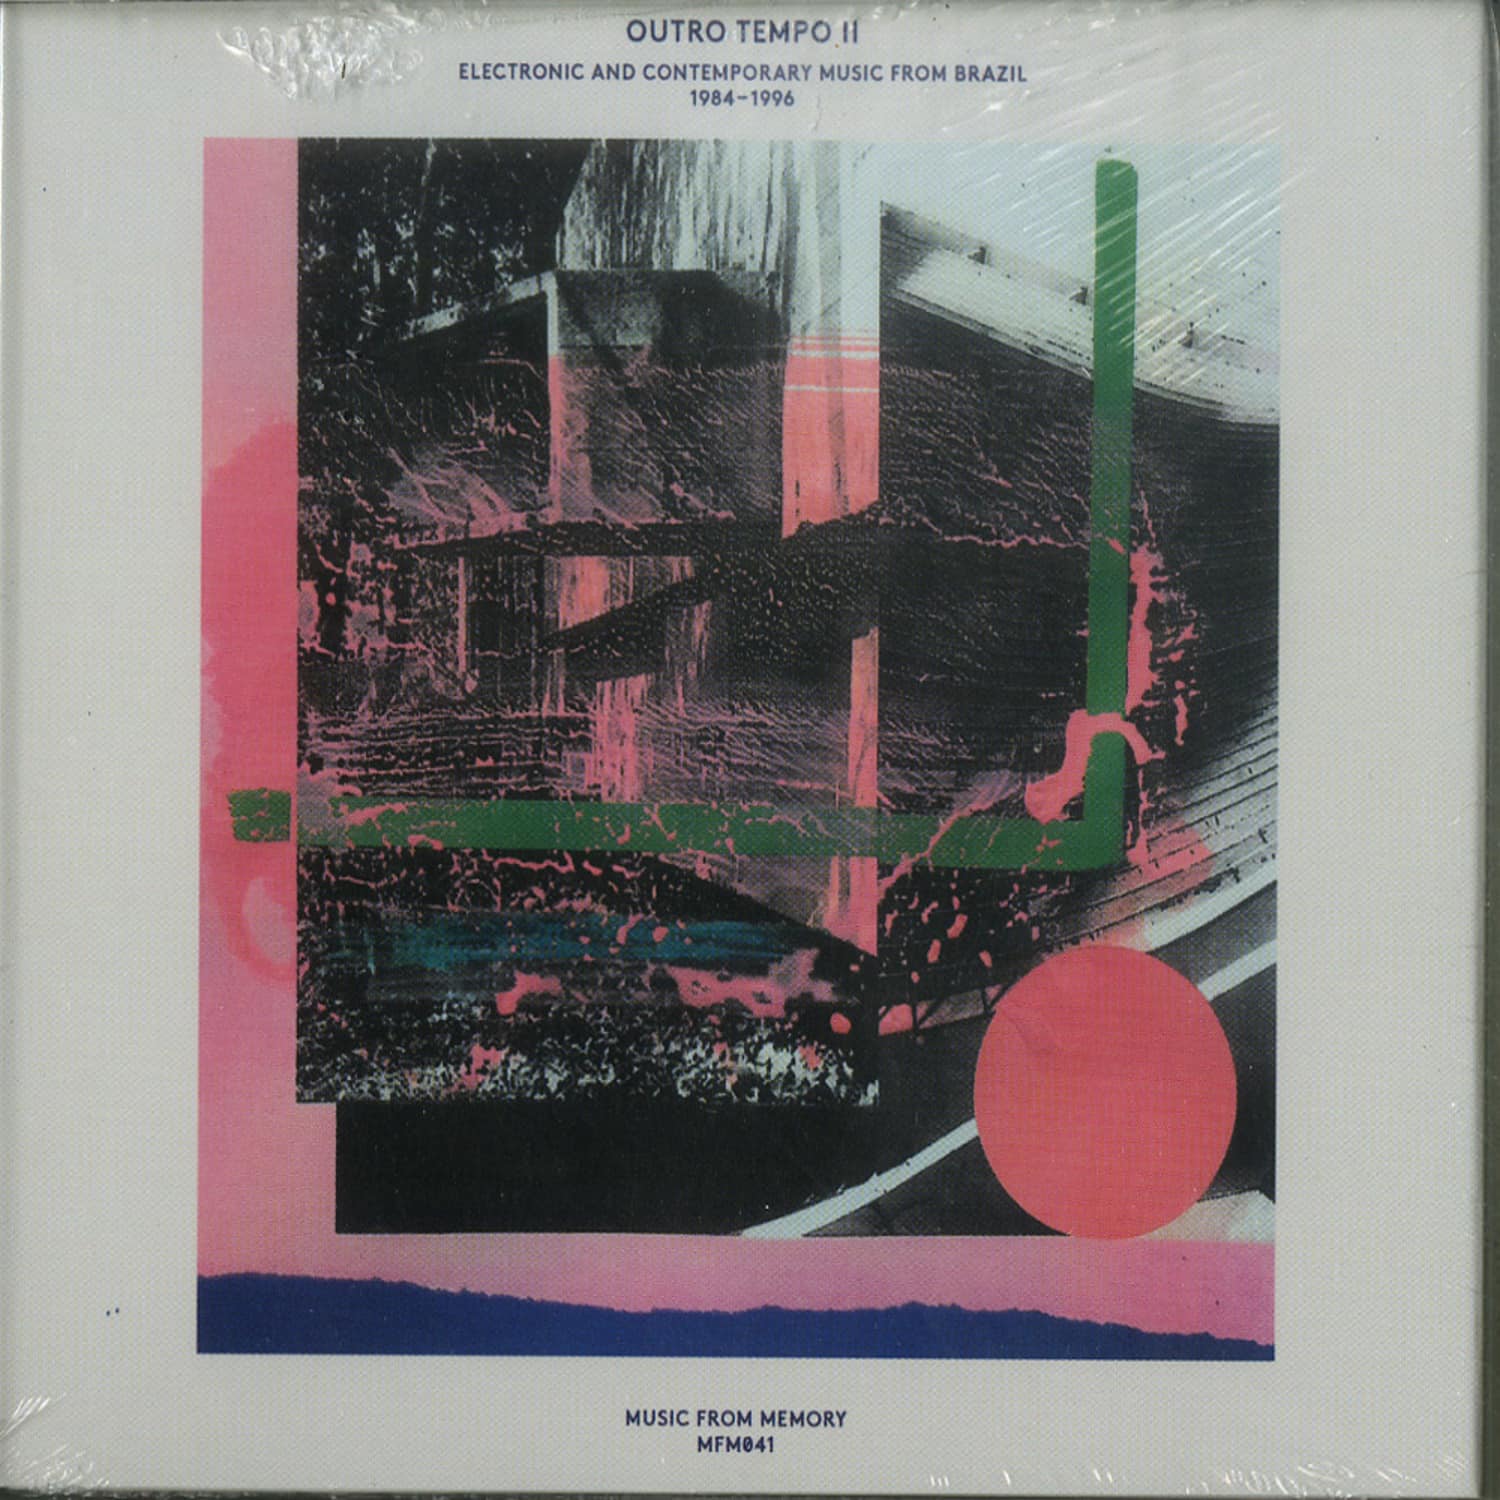 Various Artists - OUTRO TEMPO II - ELECTRONIC AND CONTEMPORARY MUSIC FROM BRAZIL 1984-1996 